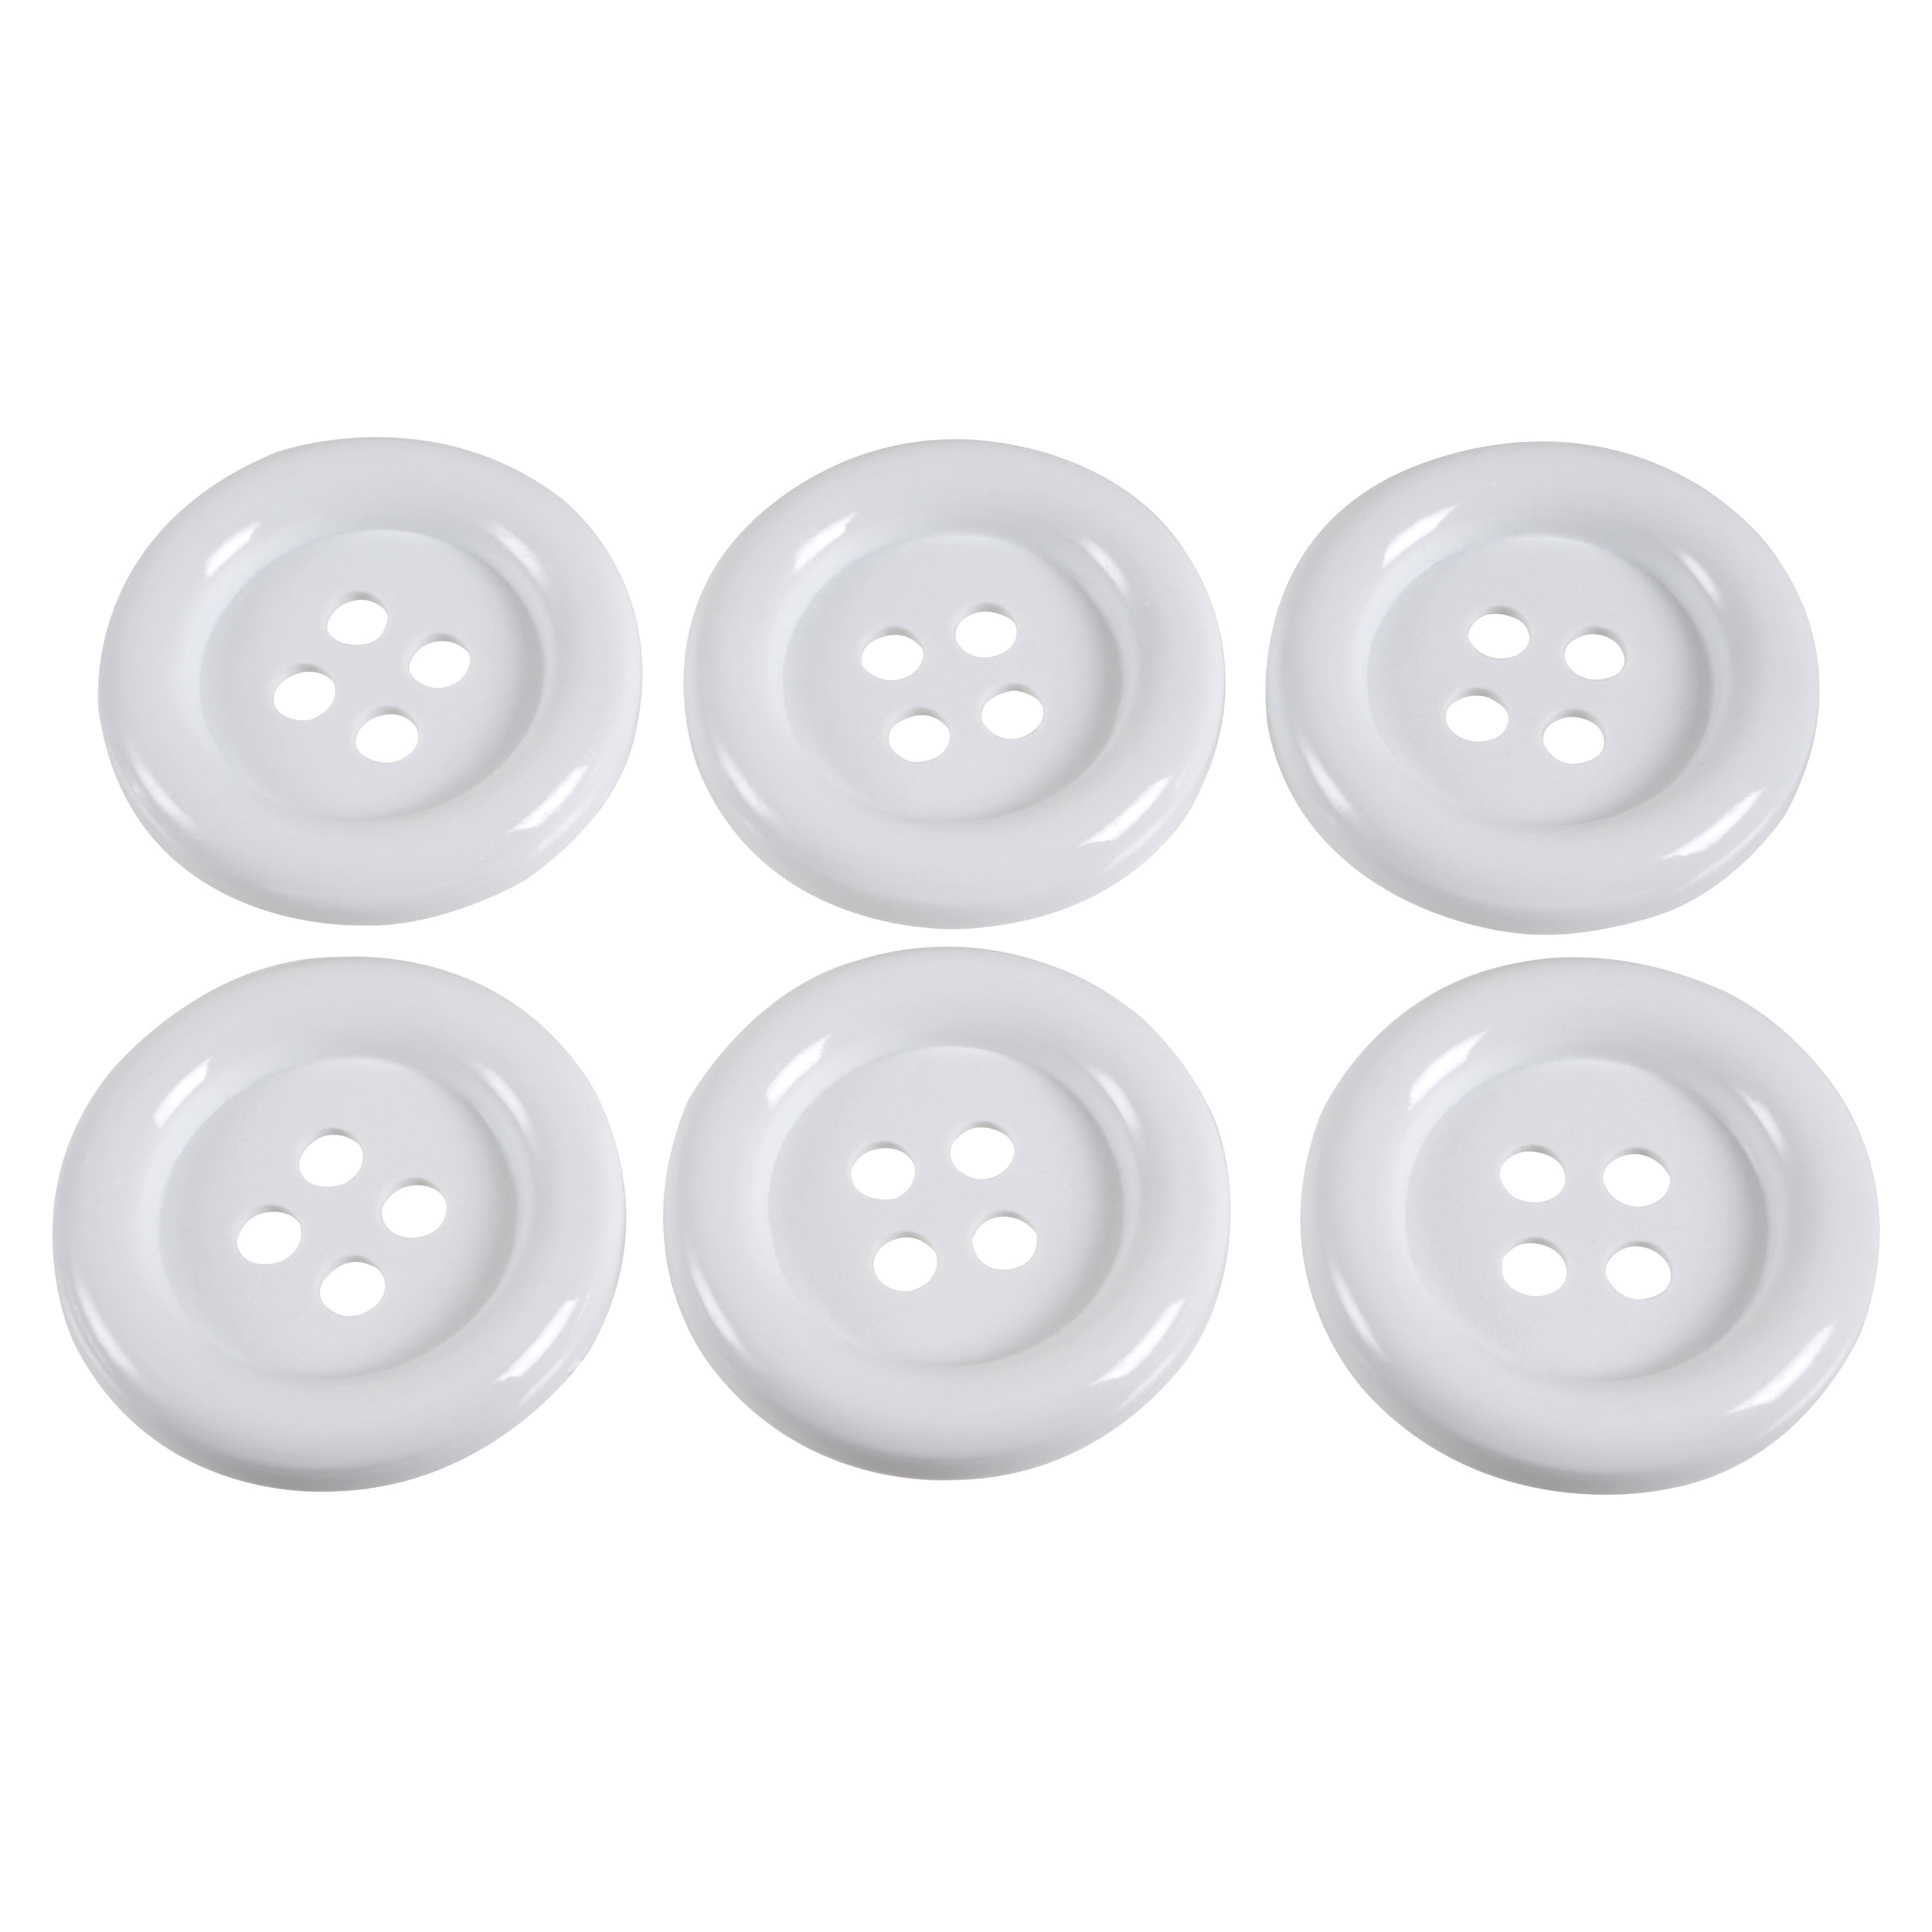 Favorite Findings White 1 3/8 4-Hole Big Buttons, 6 Pieces 